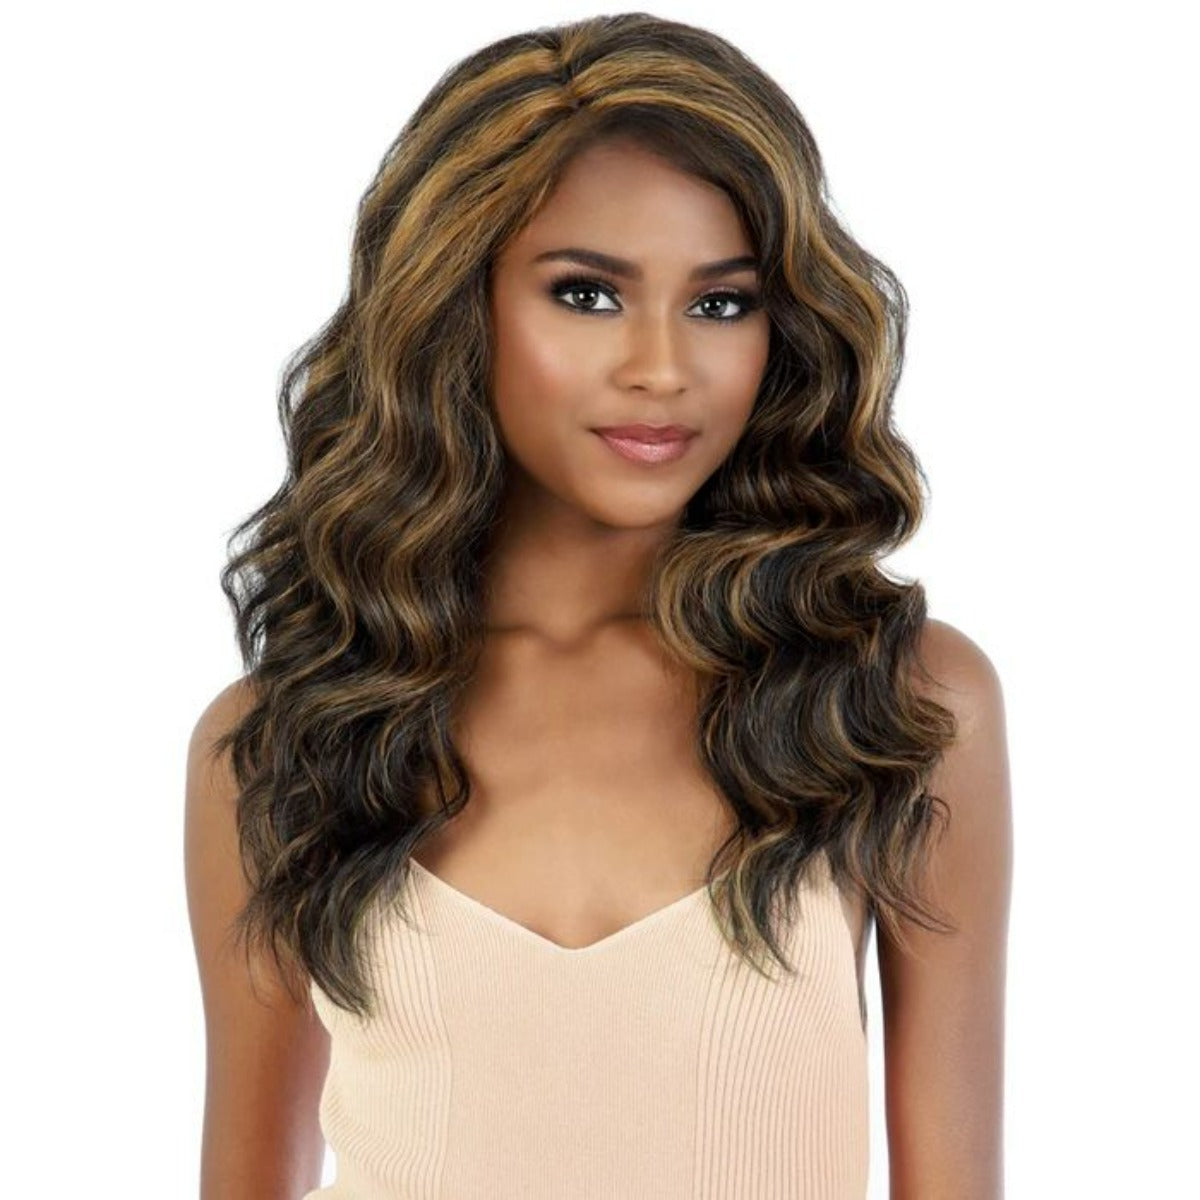 Beshe Synthetic HD Invisible Deep Part Lace Wig LLDP-SMILE